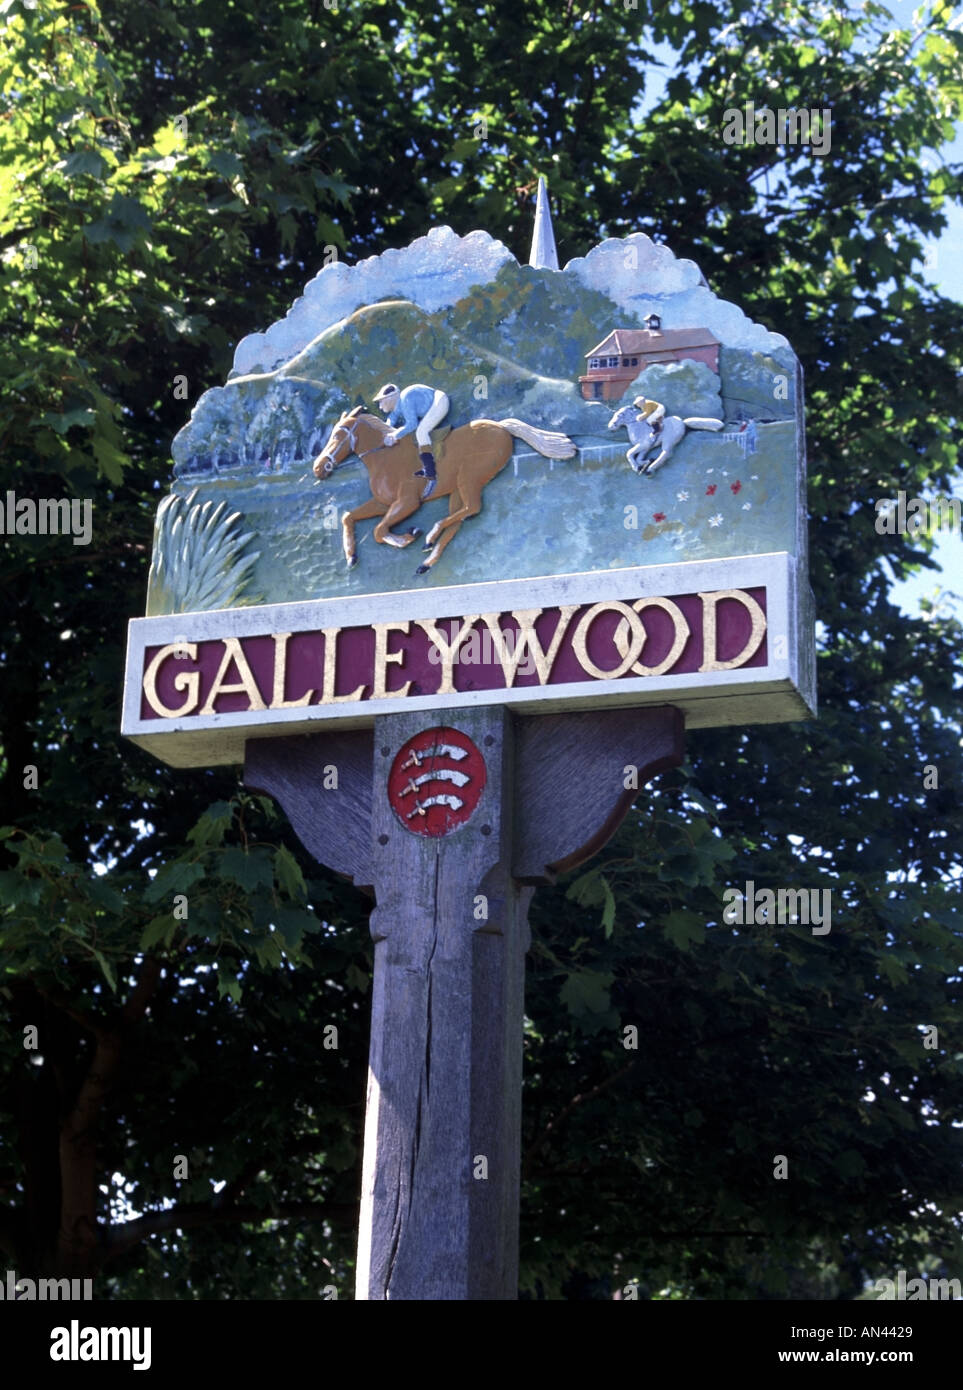 Galleywood near Chelmsford typical village sign Essex England UK Stock Photo